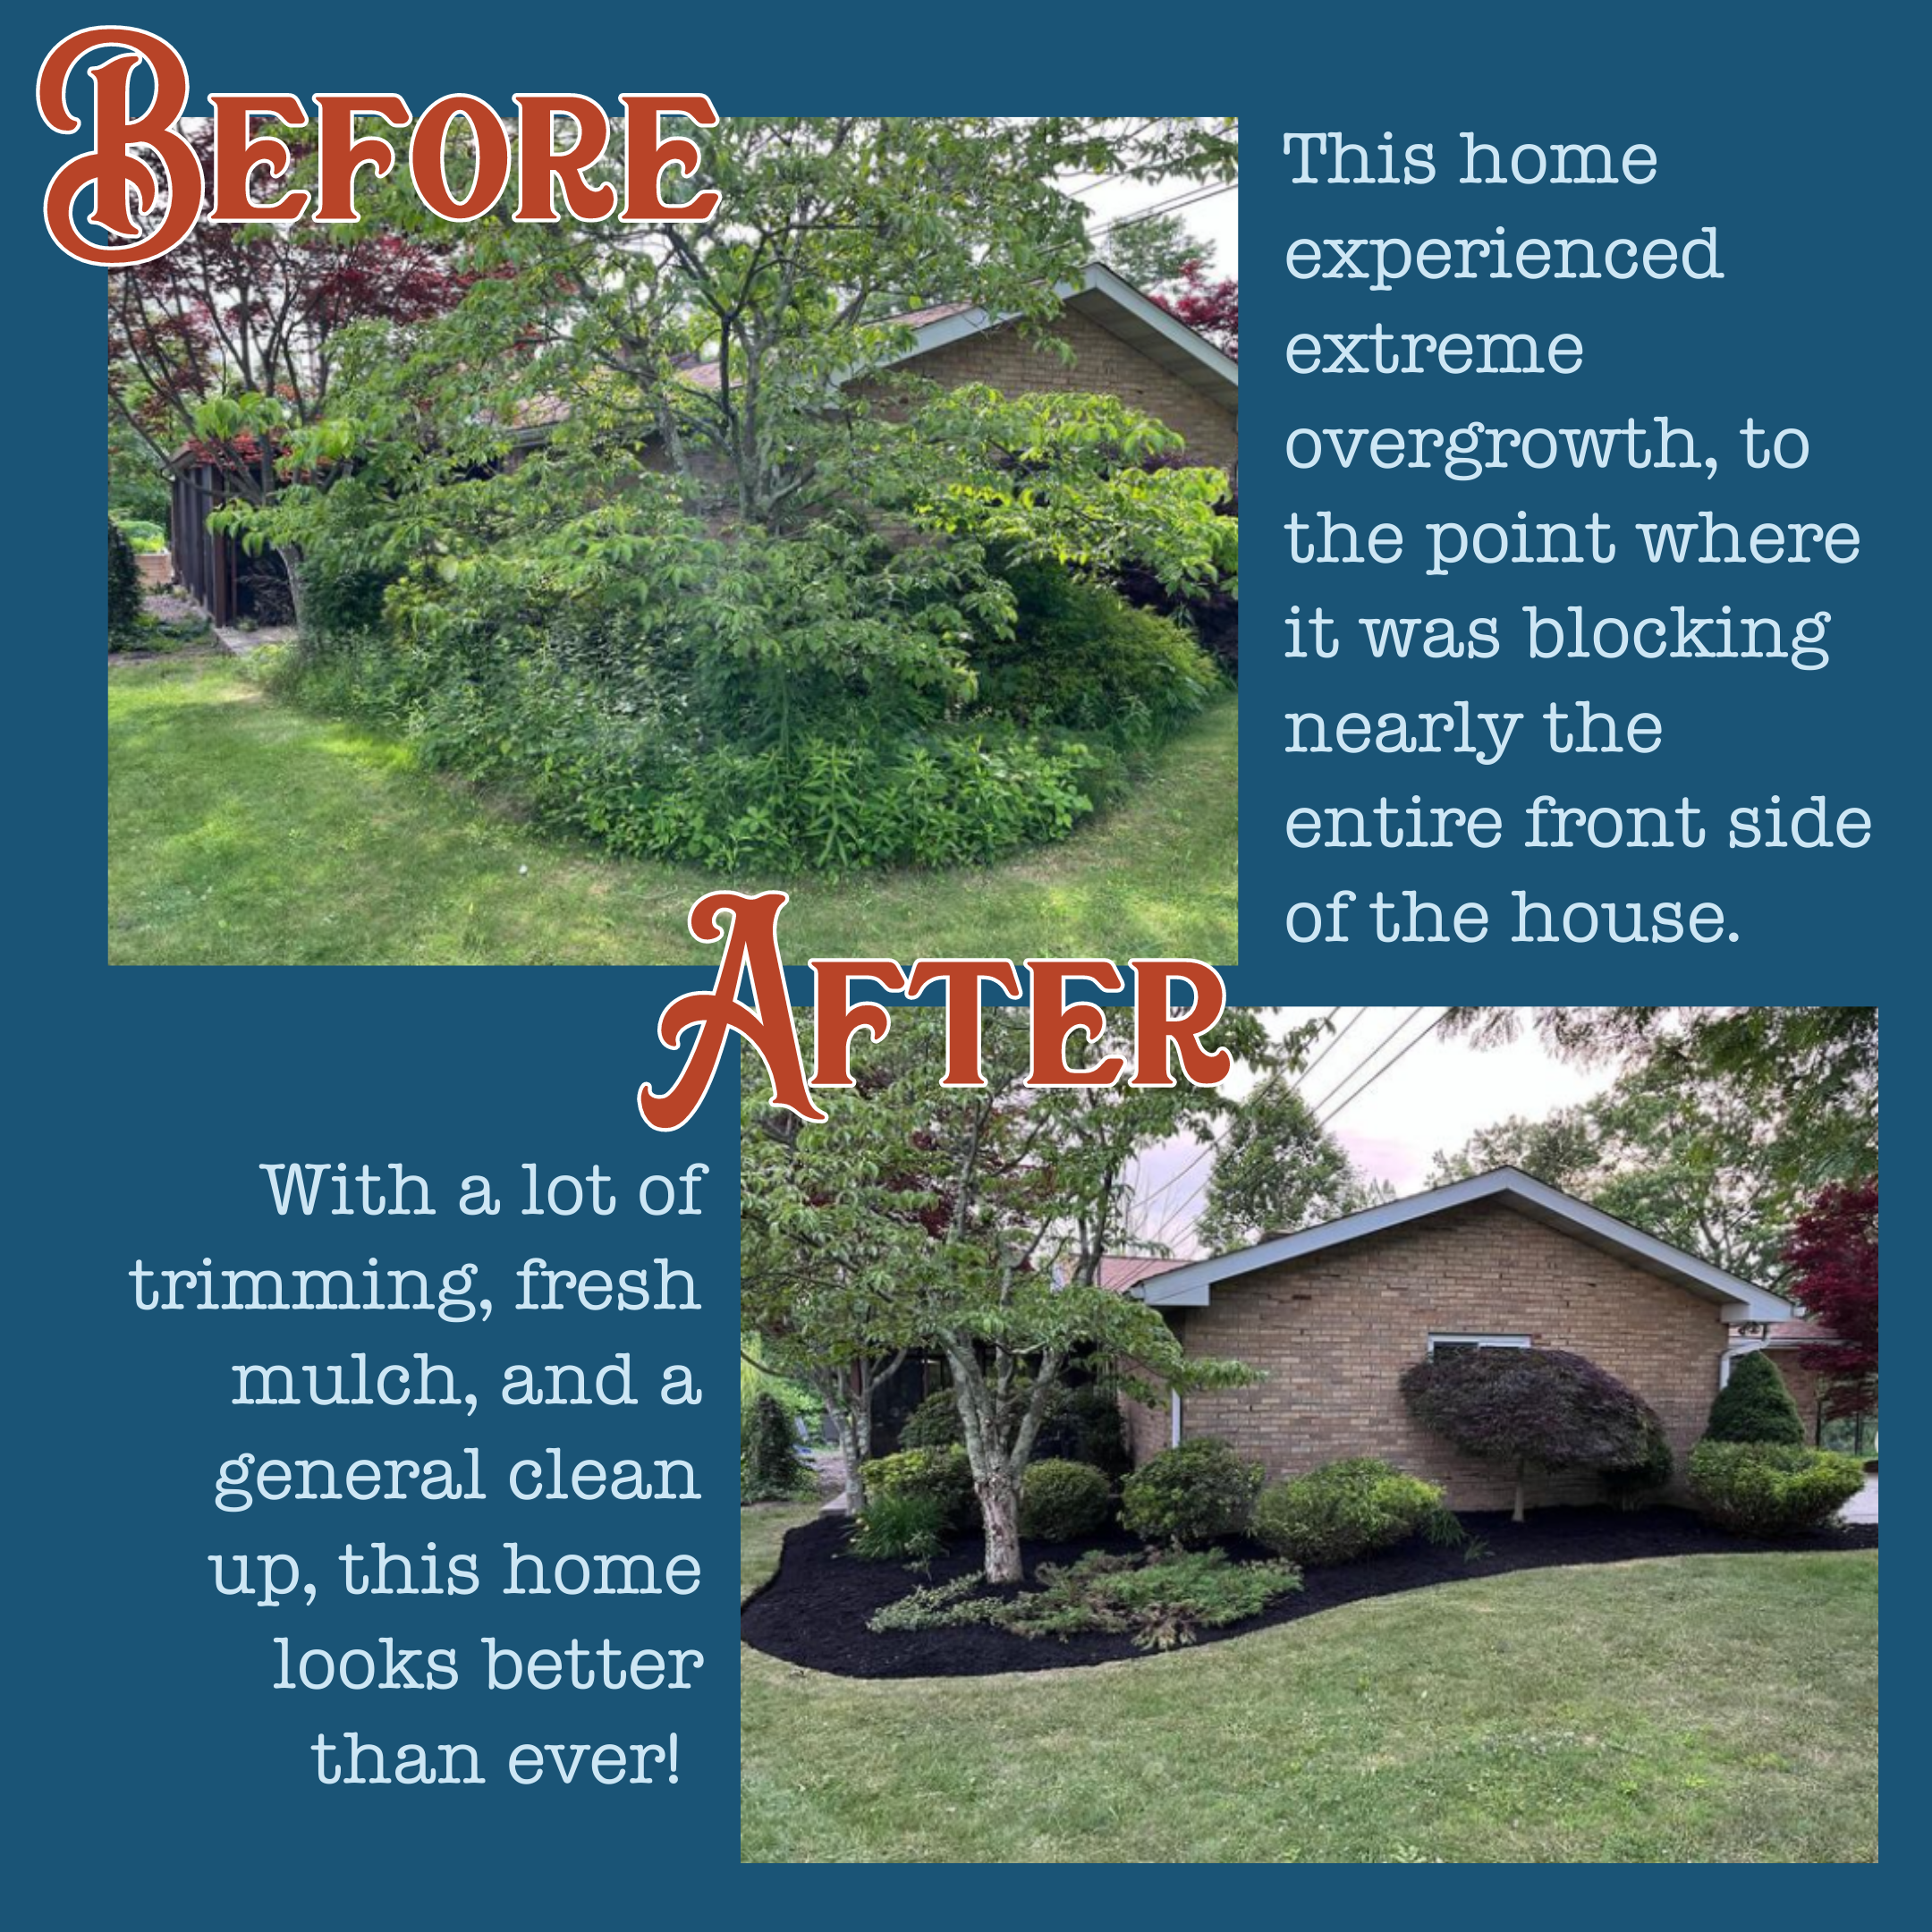 Before Kingdom Come Landscaping: This home experienced extreme overgrowth, to the point where it was blocking nearly the entire front side of the house. After: With a lot of trimming, fresh mulch, and a general clean up, this home looks better than ever!